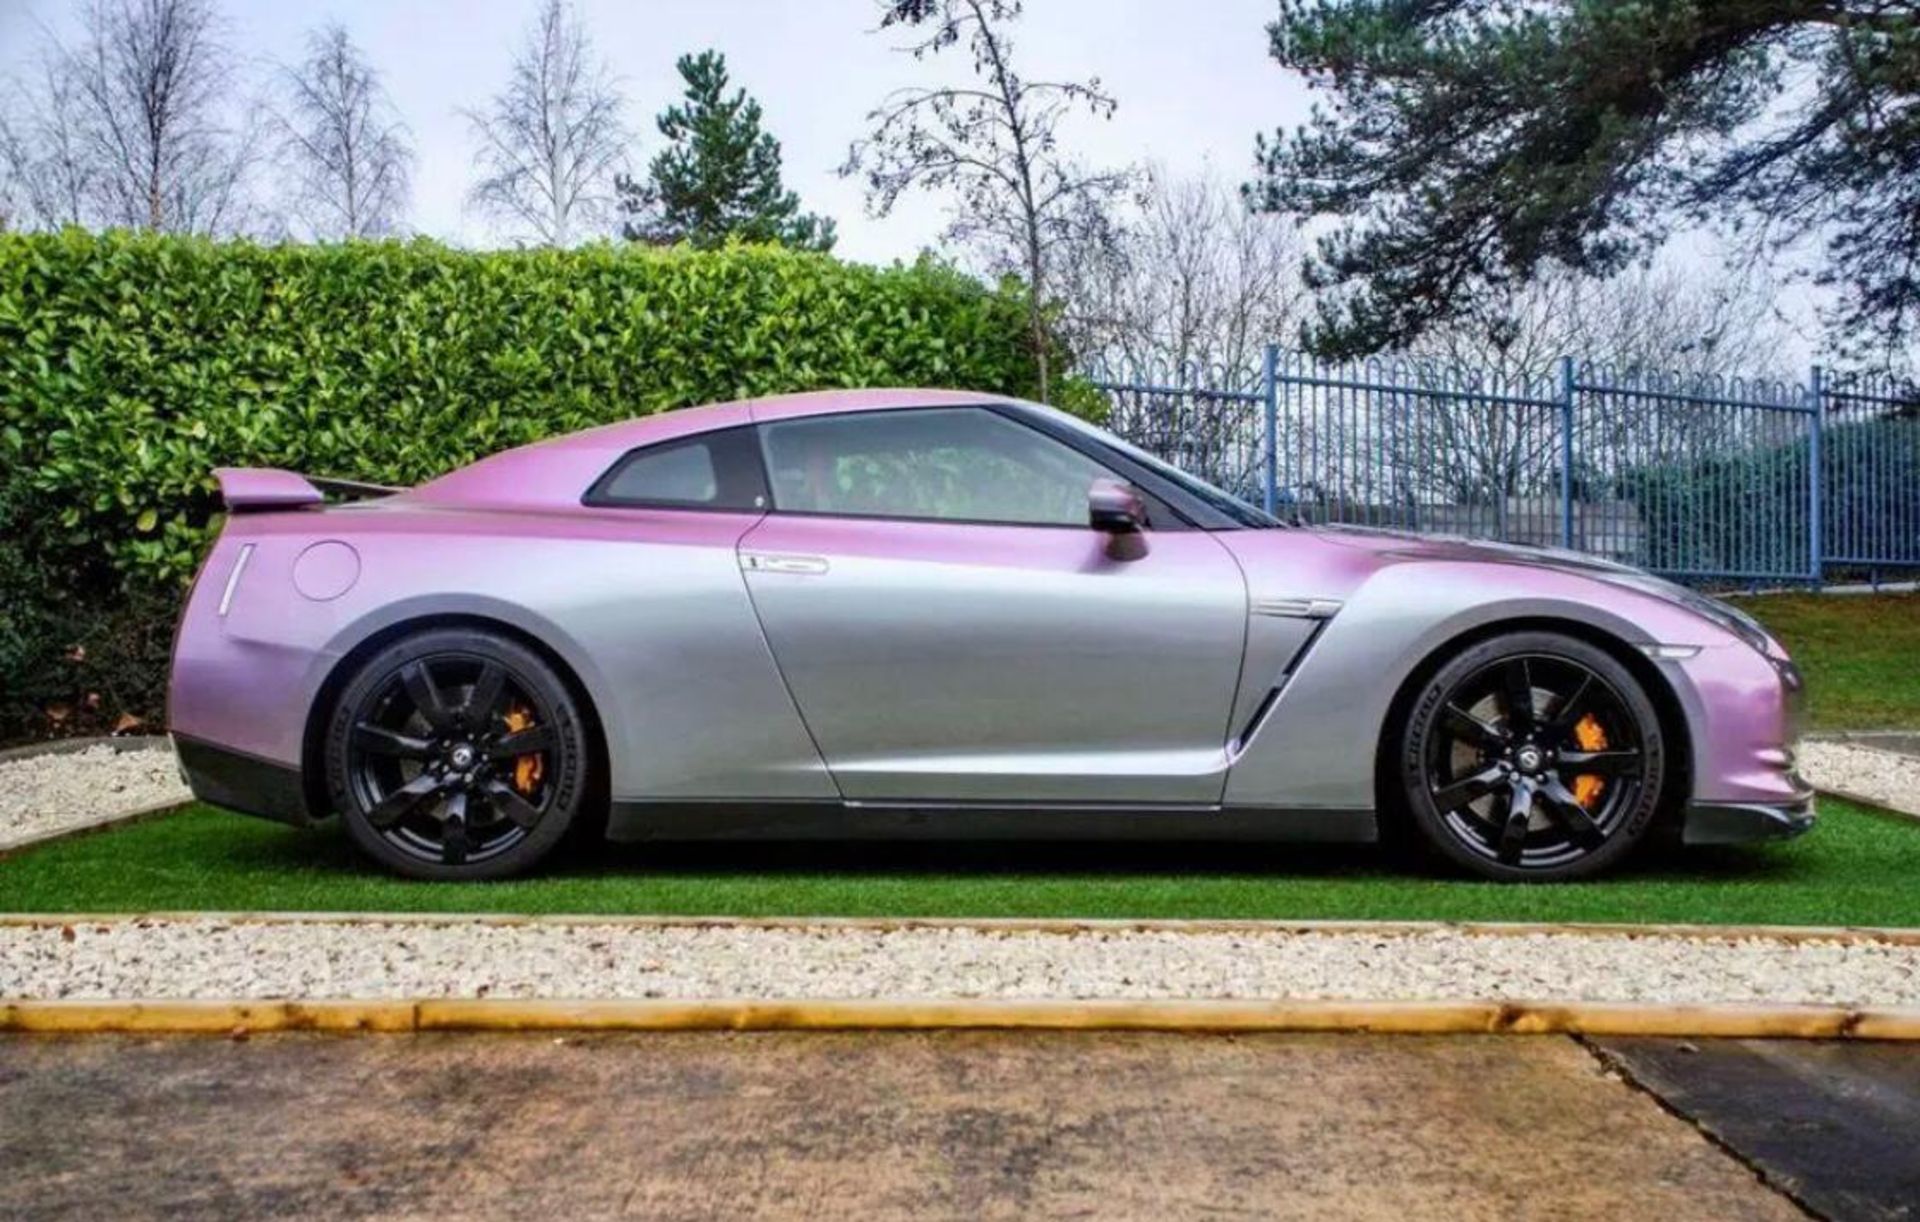 2009 NISSAN GT-R R35 BLACK EDITION 3.8L PETROL COUPE 2DR 479 BHP, CUSTOM PEARLESCENT WRAP *NO VAT* - Image 5 of 11